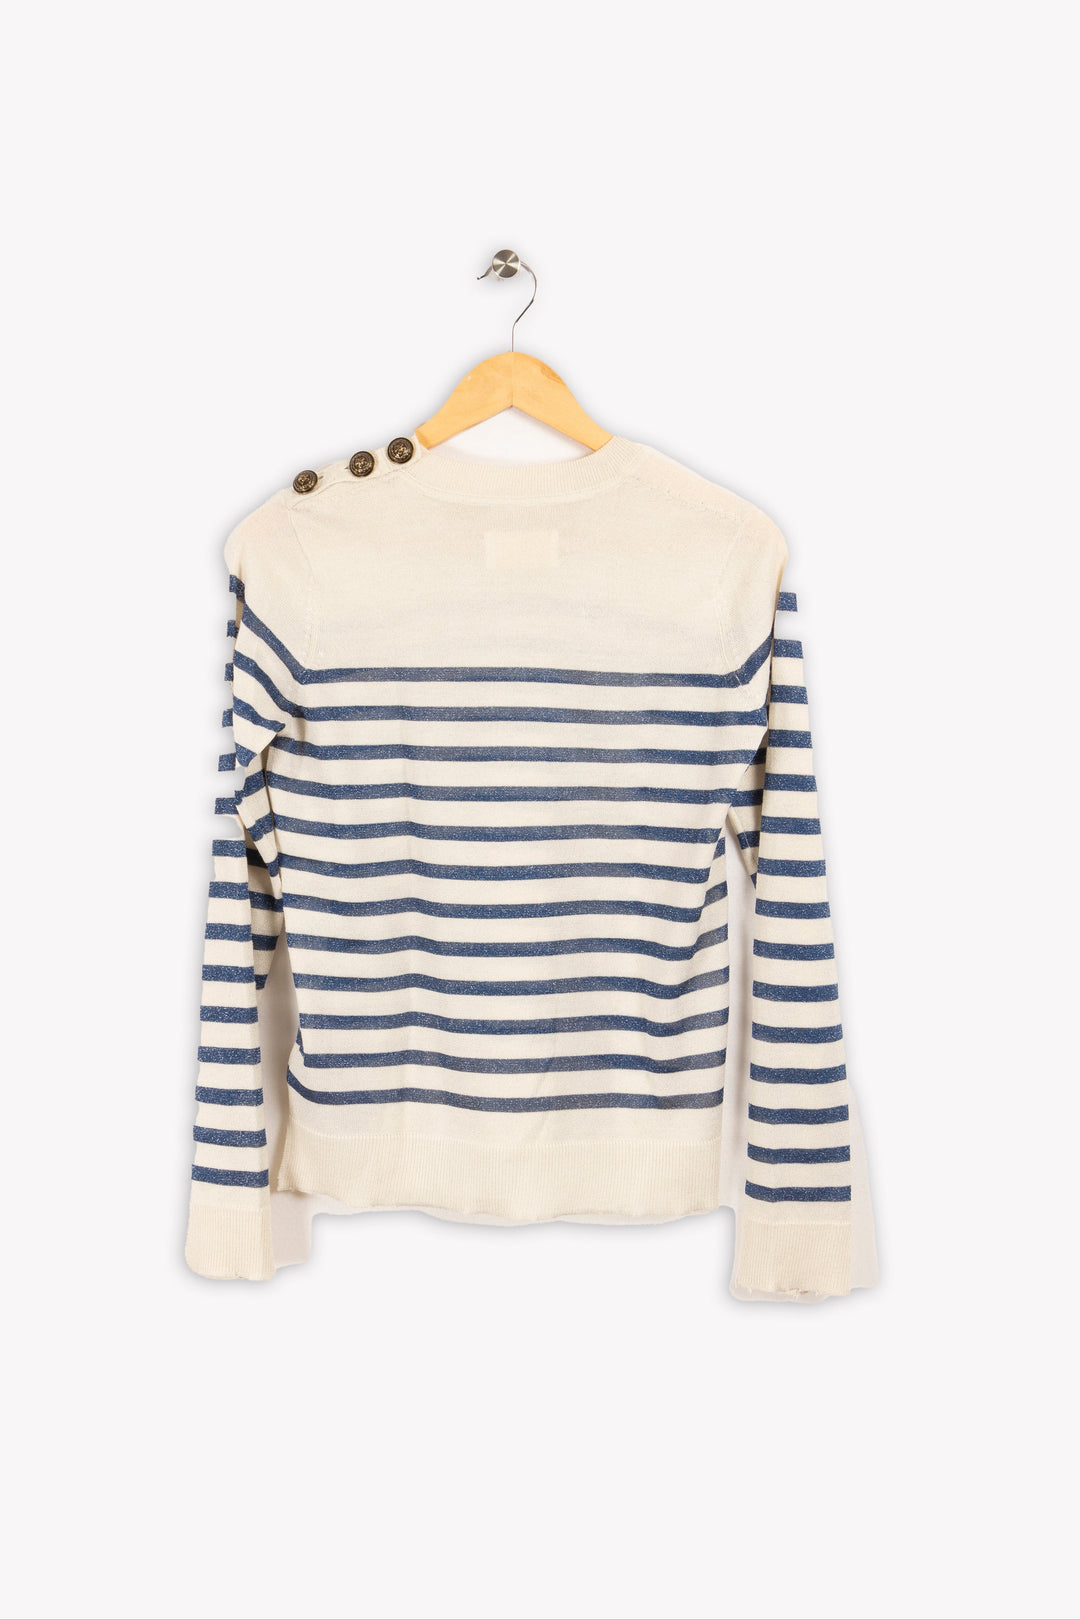 Blue and white sweater - S / 36